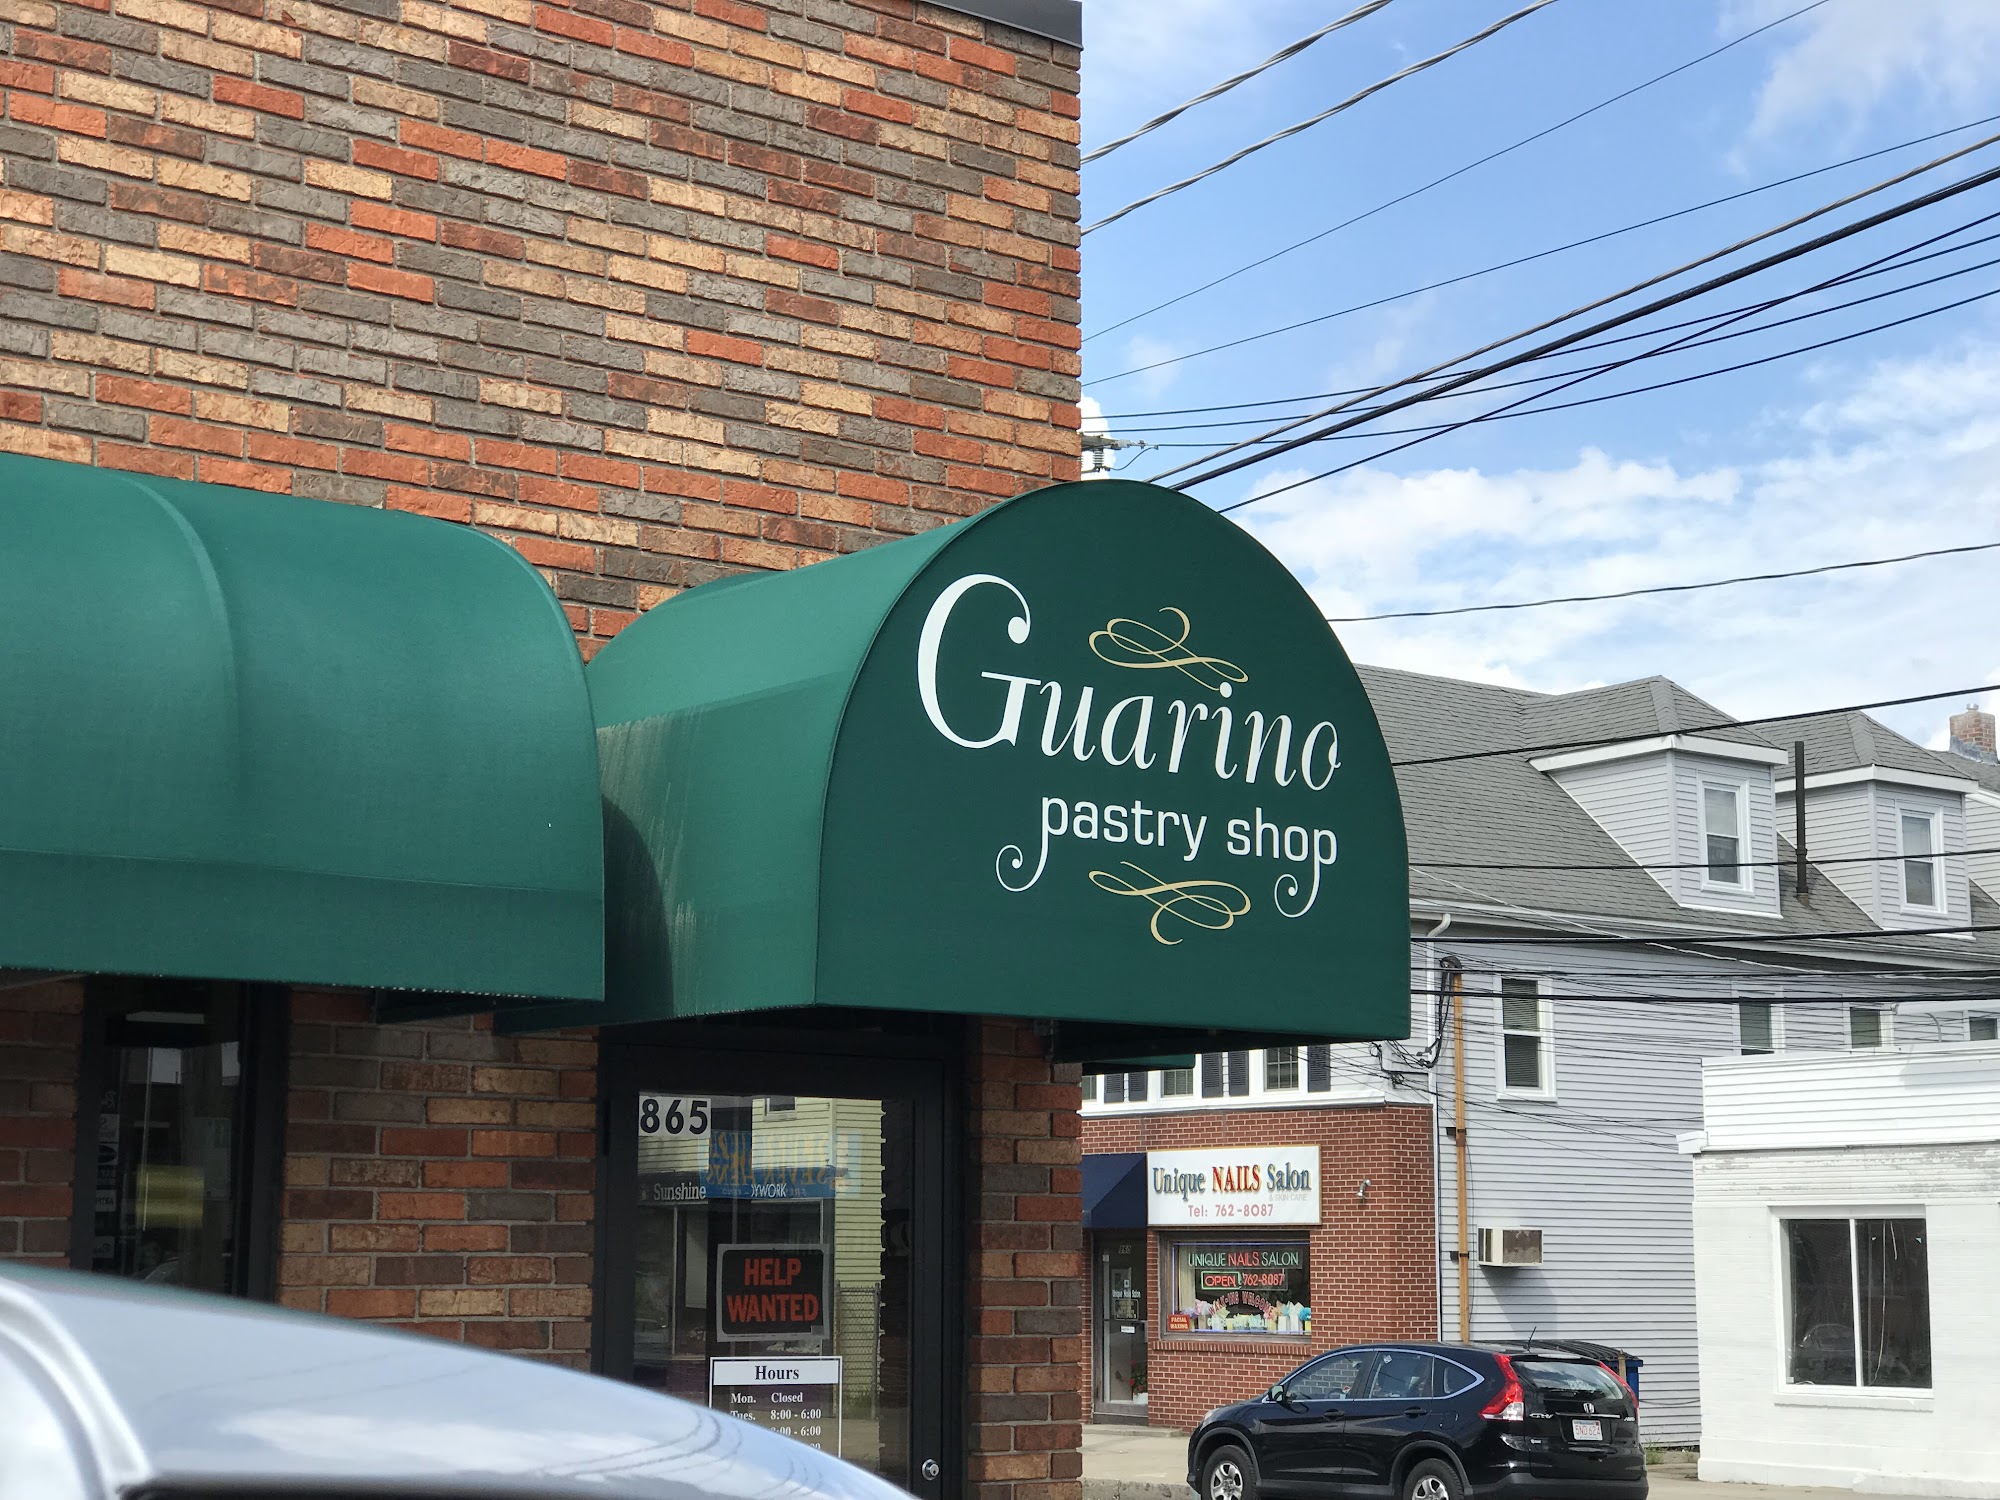 Guarino's Pastry Shop